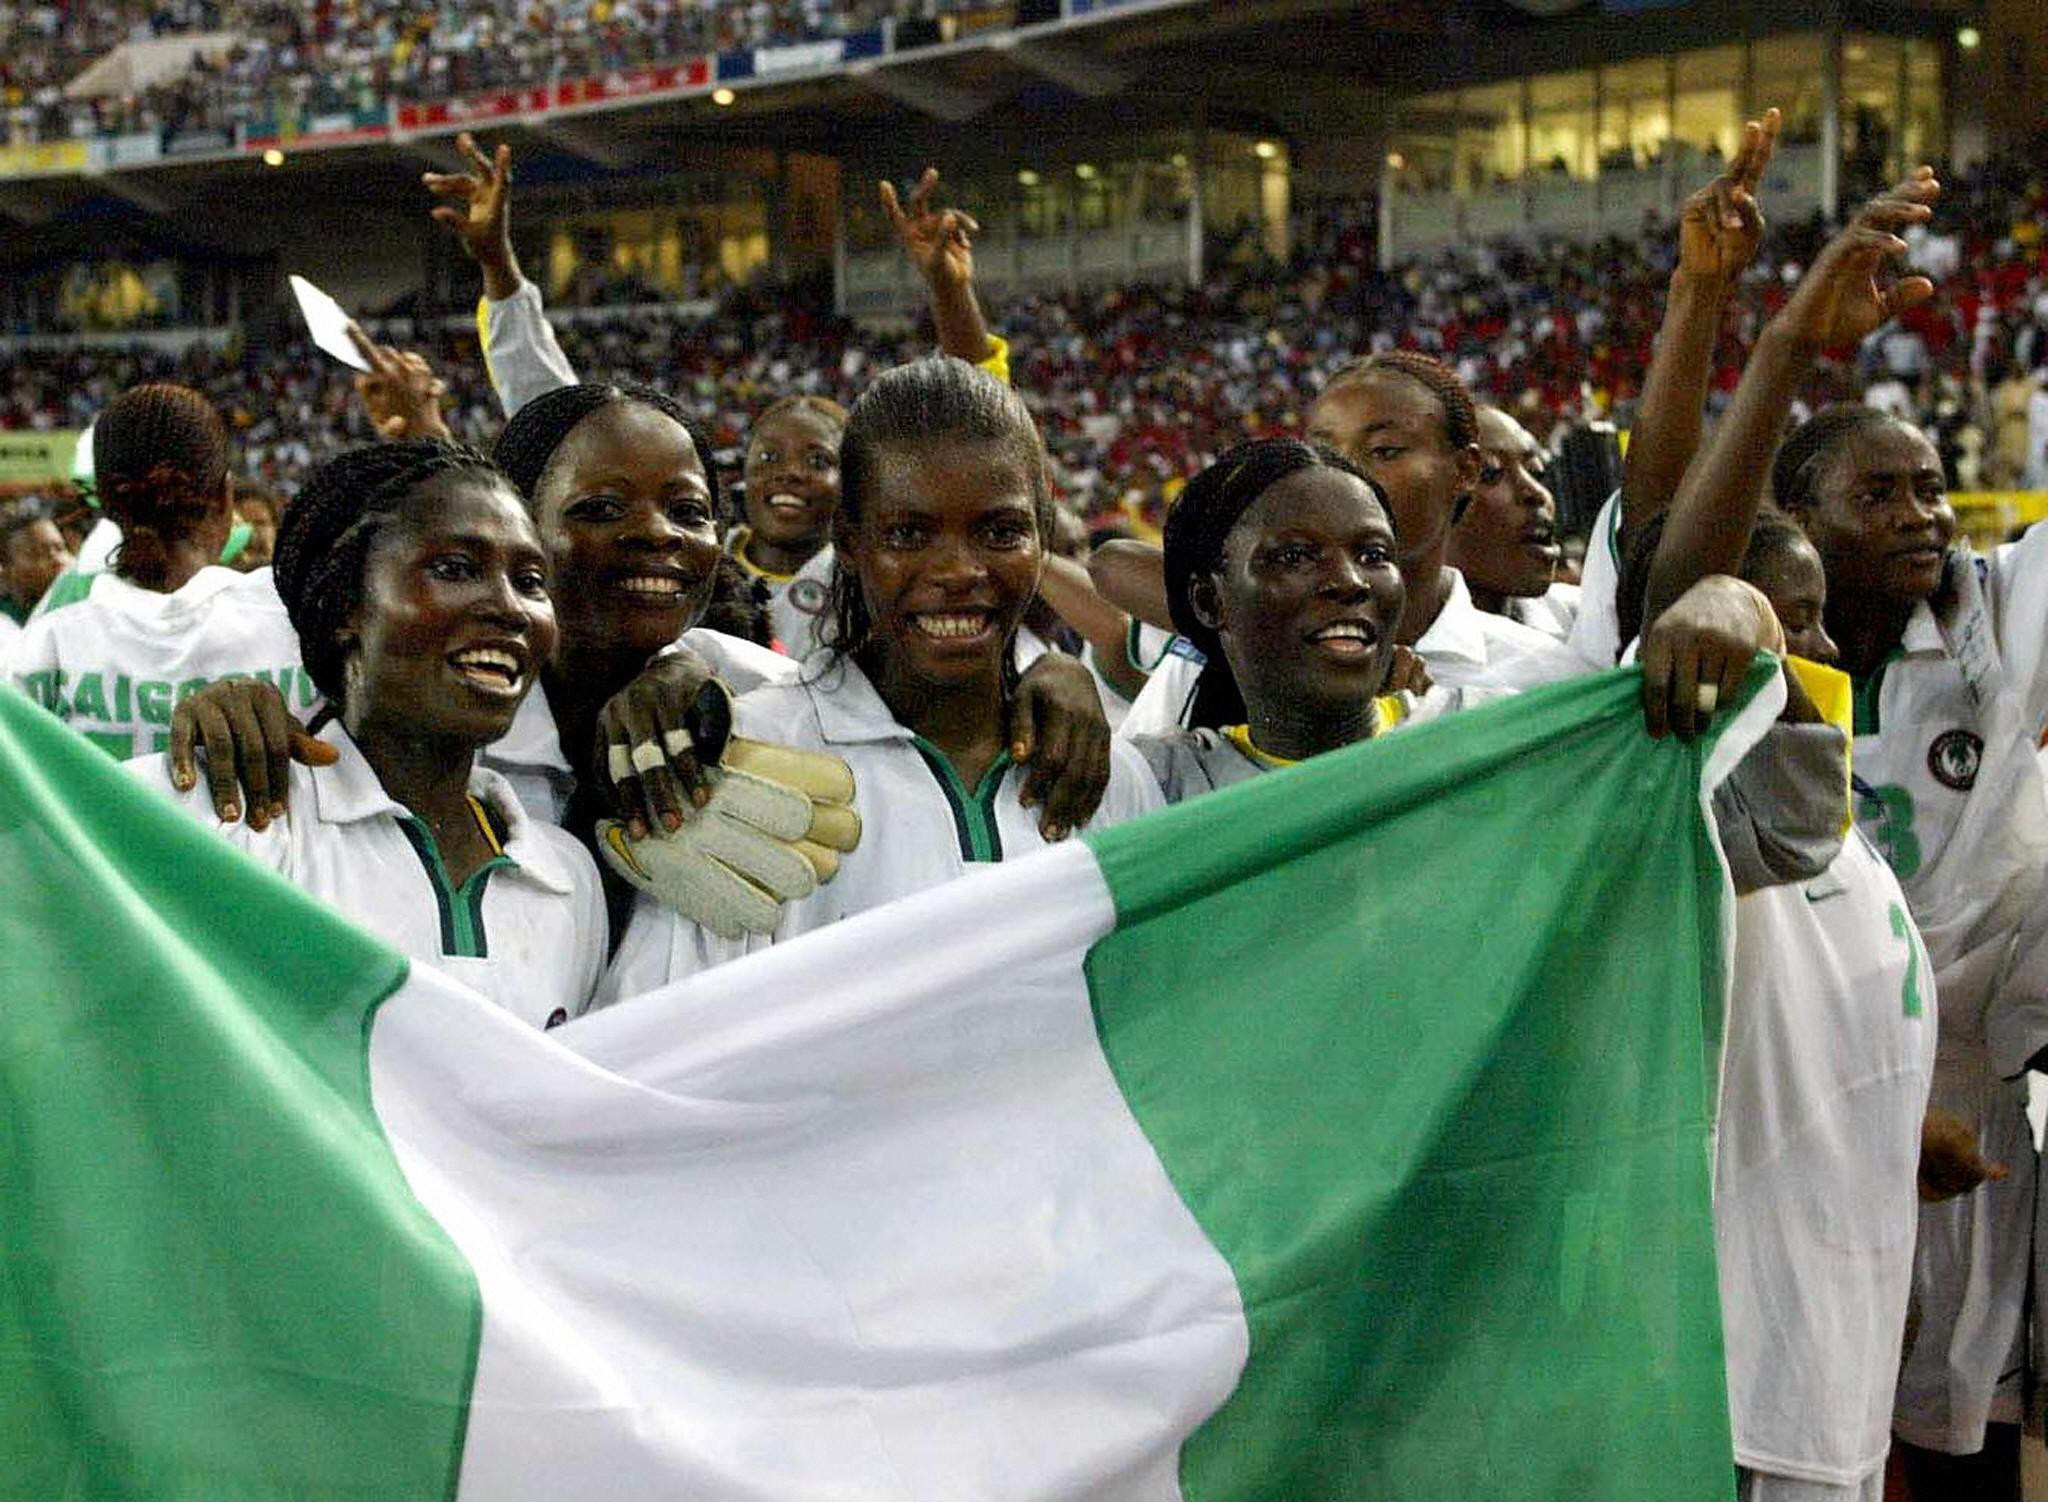 Nigeria last held the African Games in Abuja in 2003 ©Getty Images